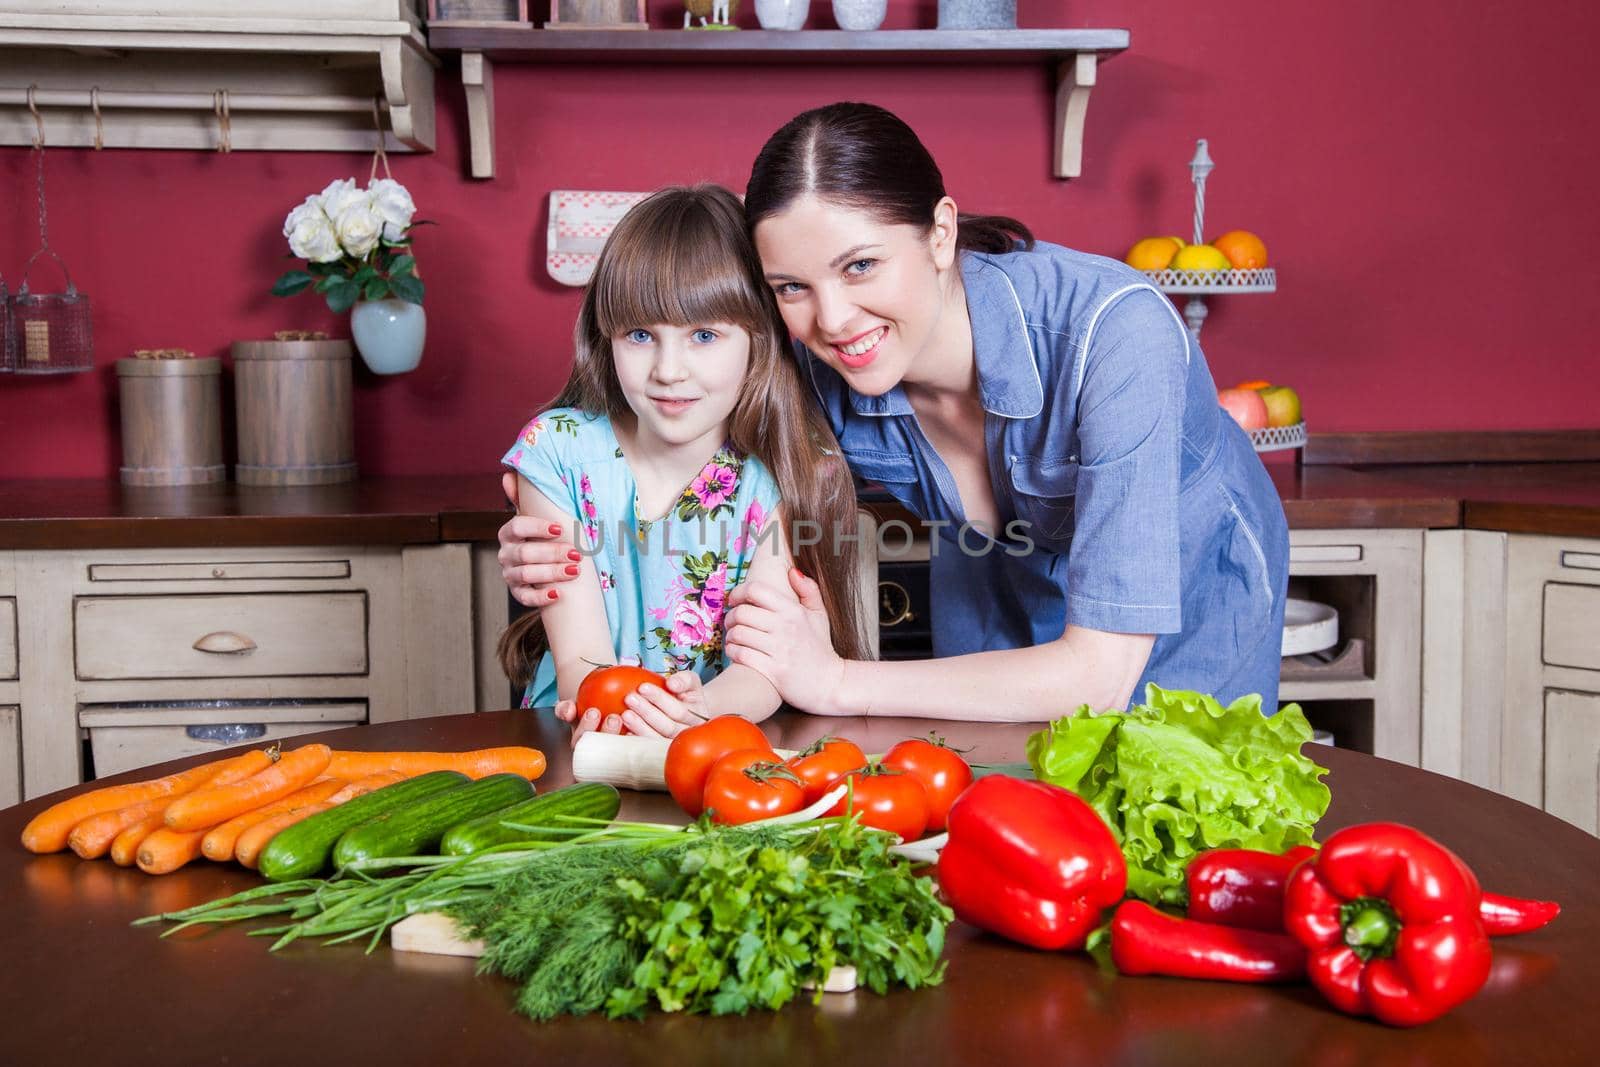 Happy mother and daughter enjoy making and having healthy meal together by Khosro1